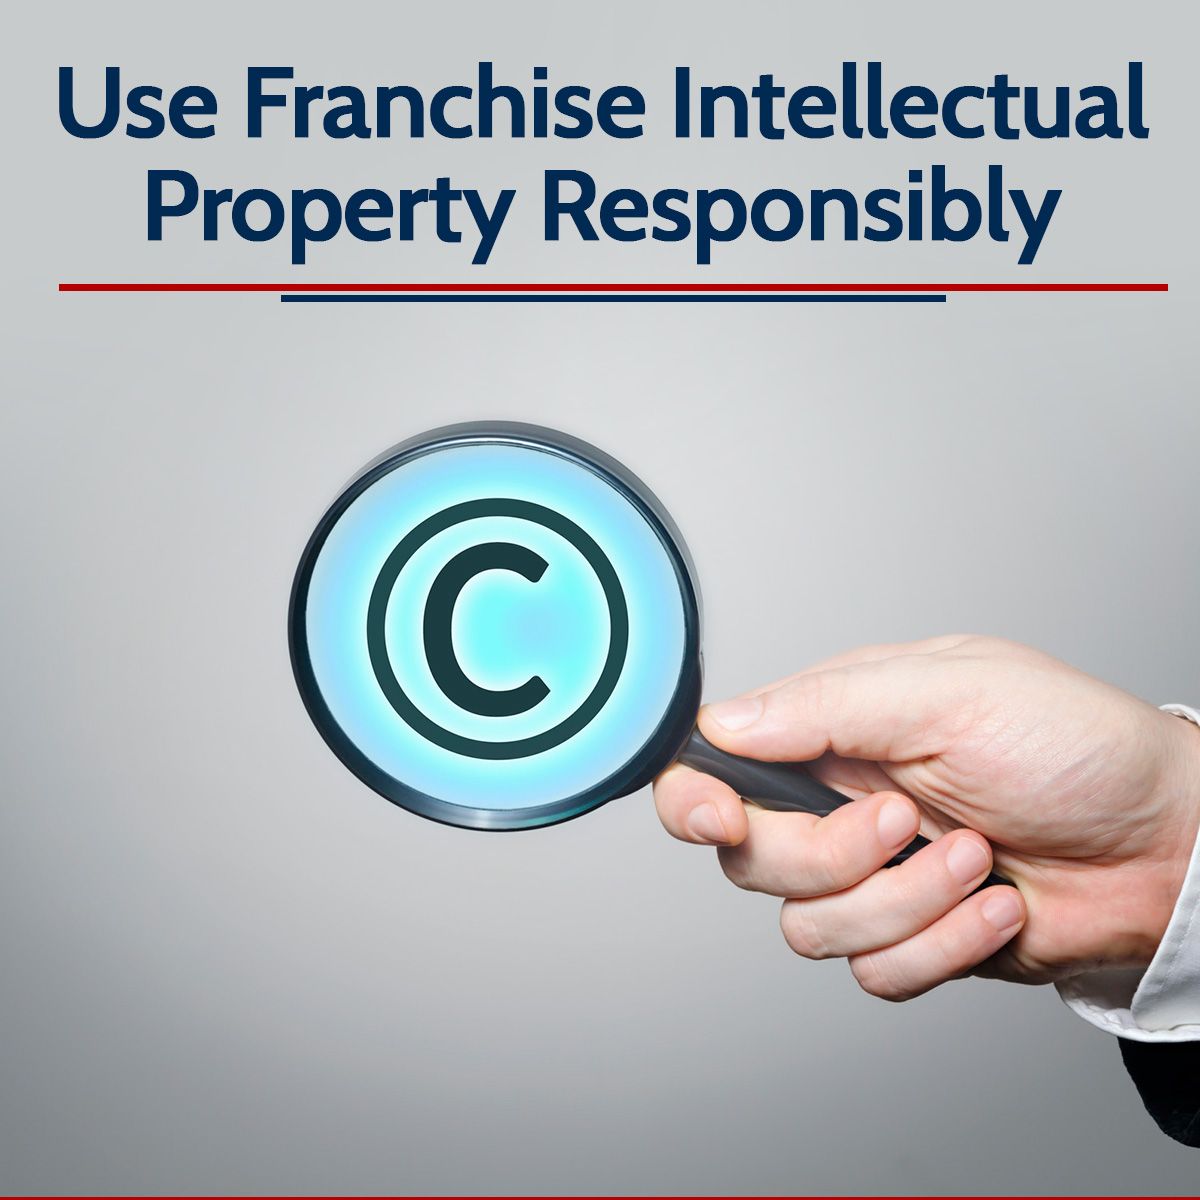 Use Franchise Intellectual Property Responsibly